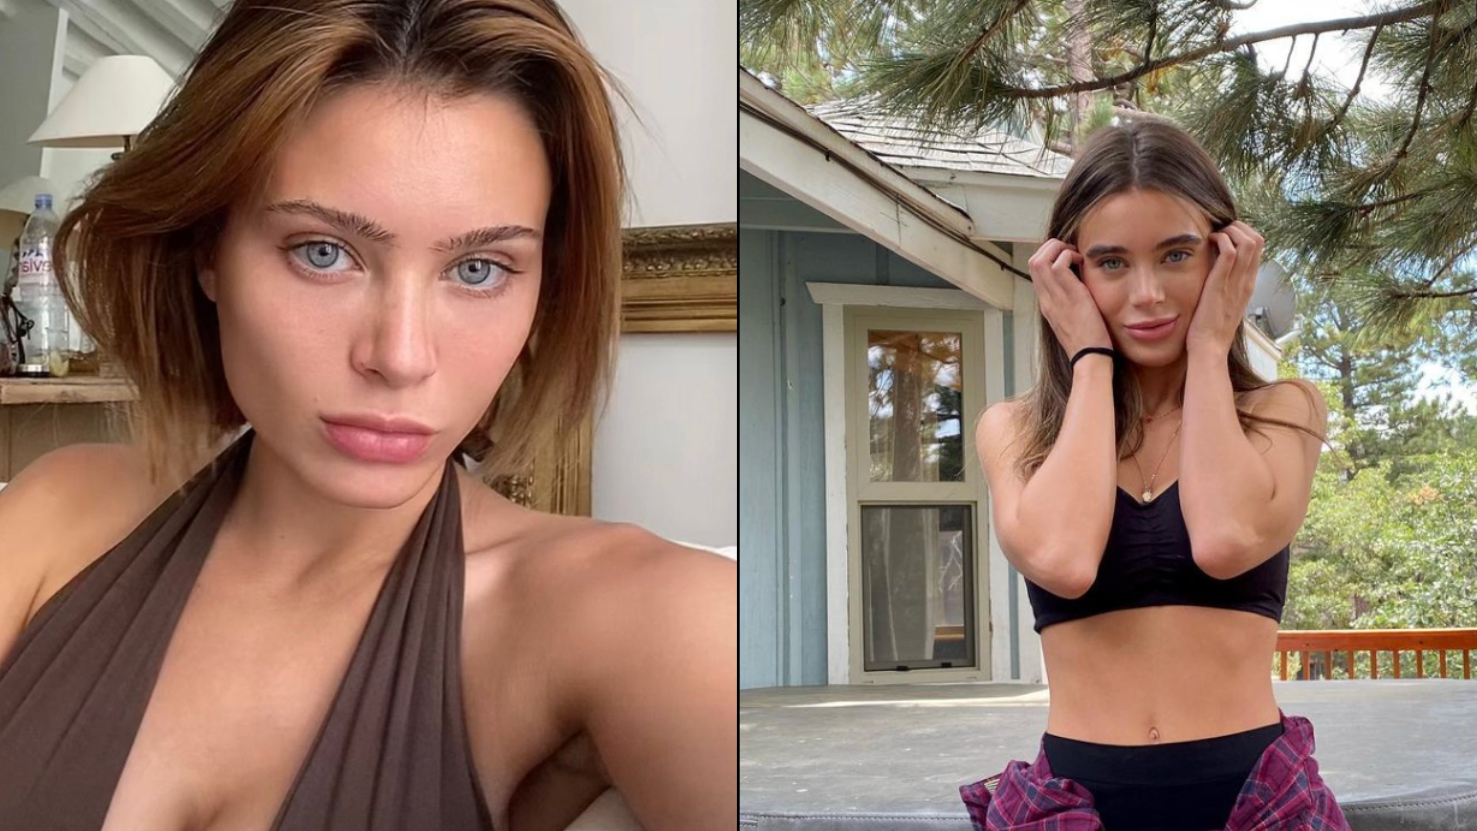 Lana Rhoades makes shocking comments about porn after 'dropping